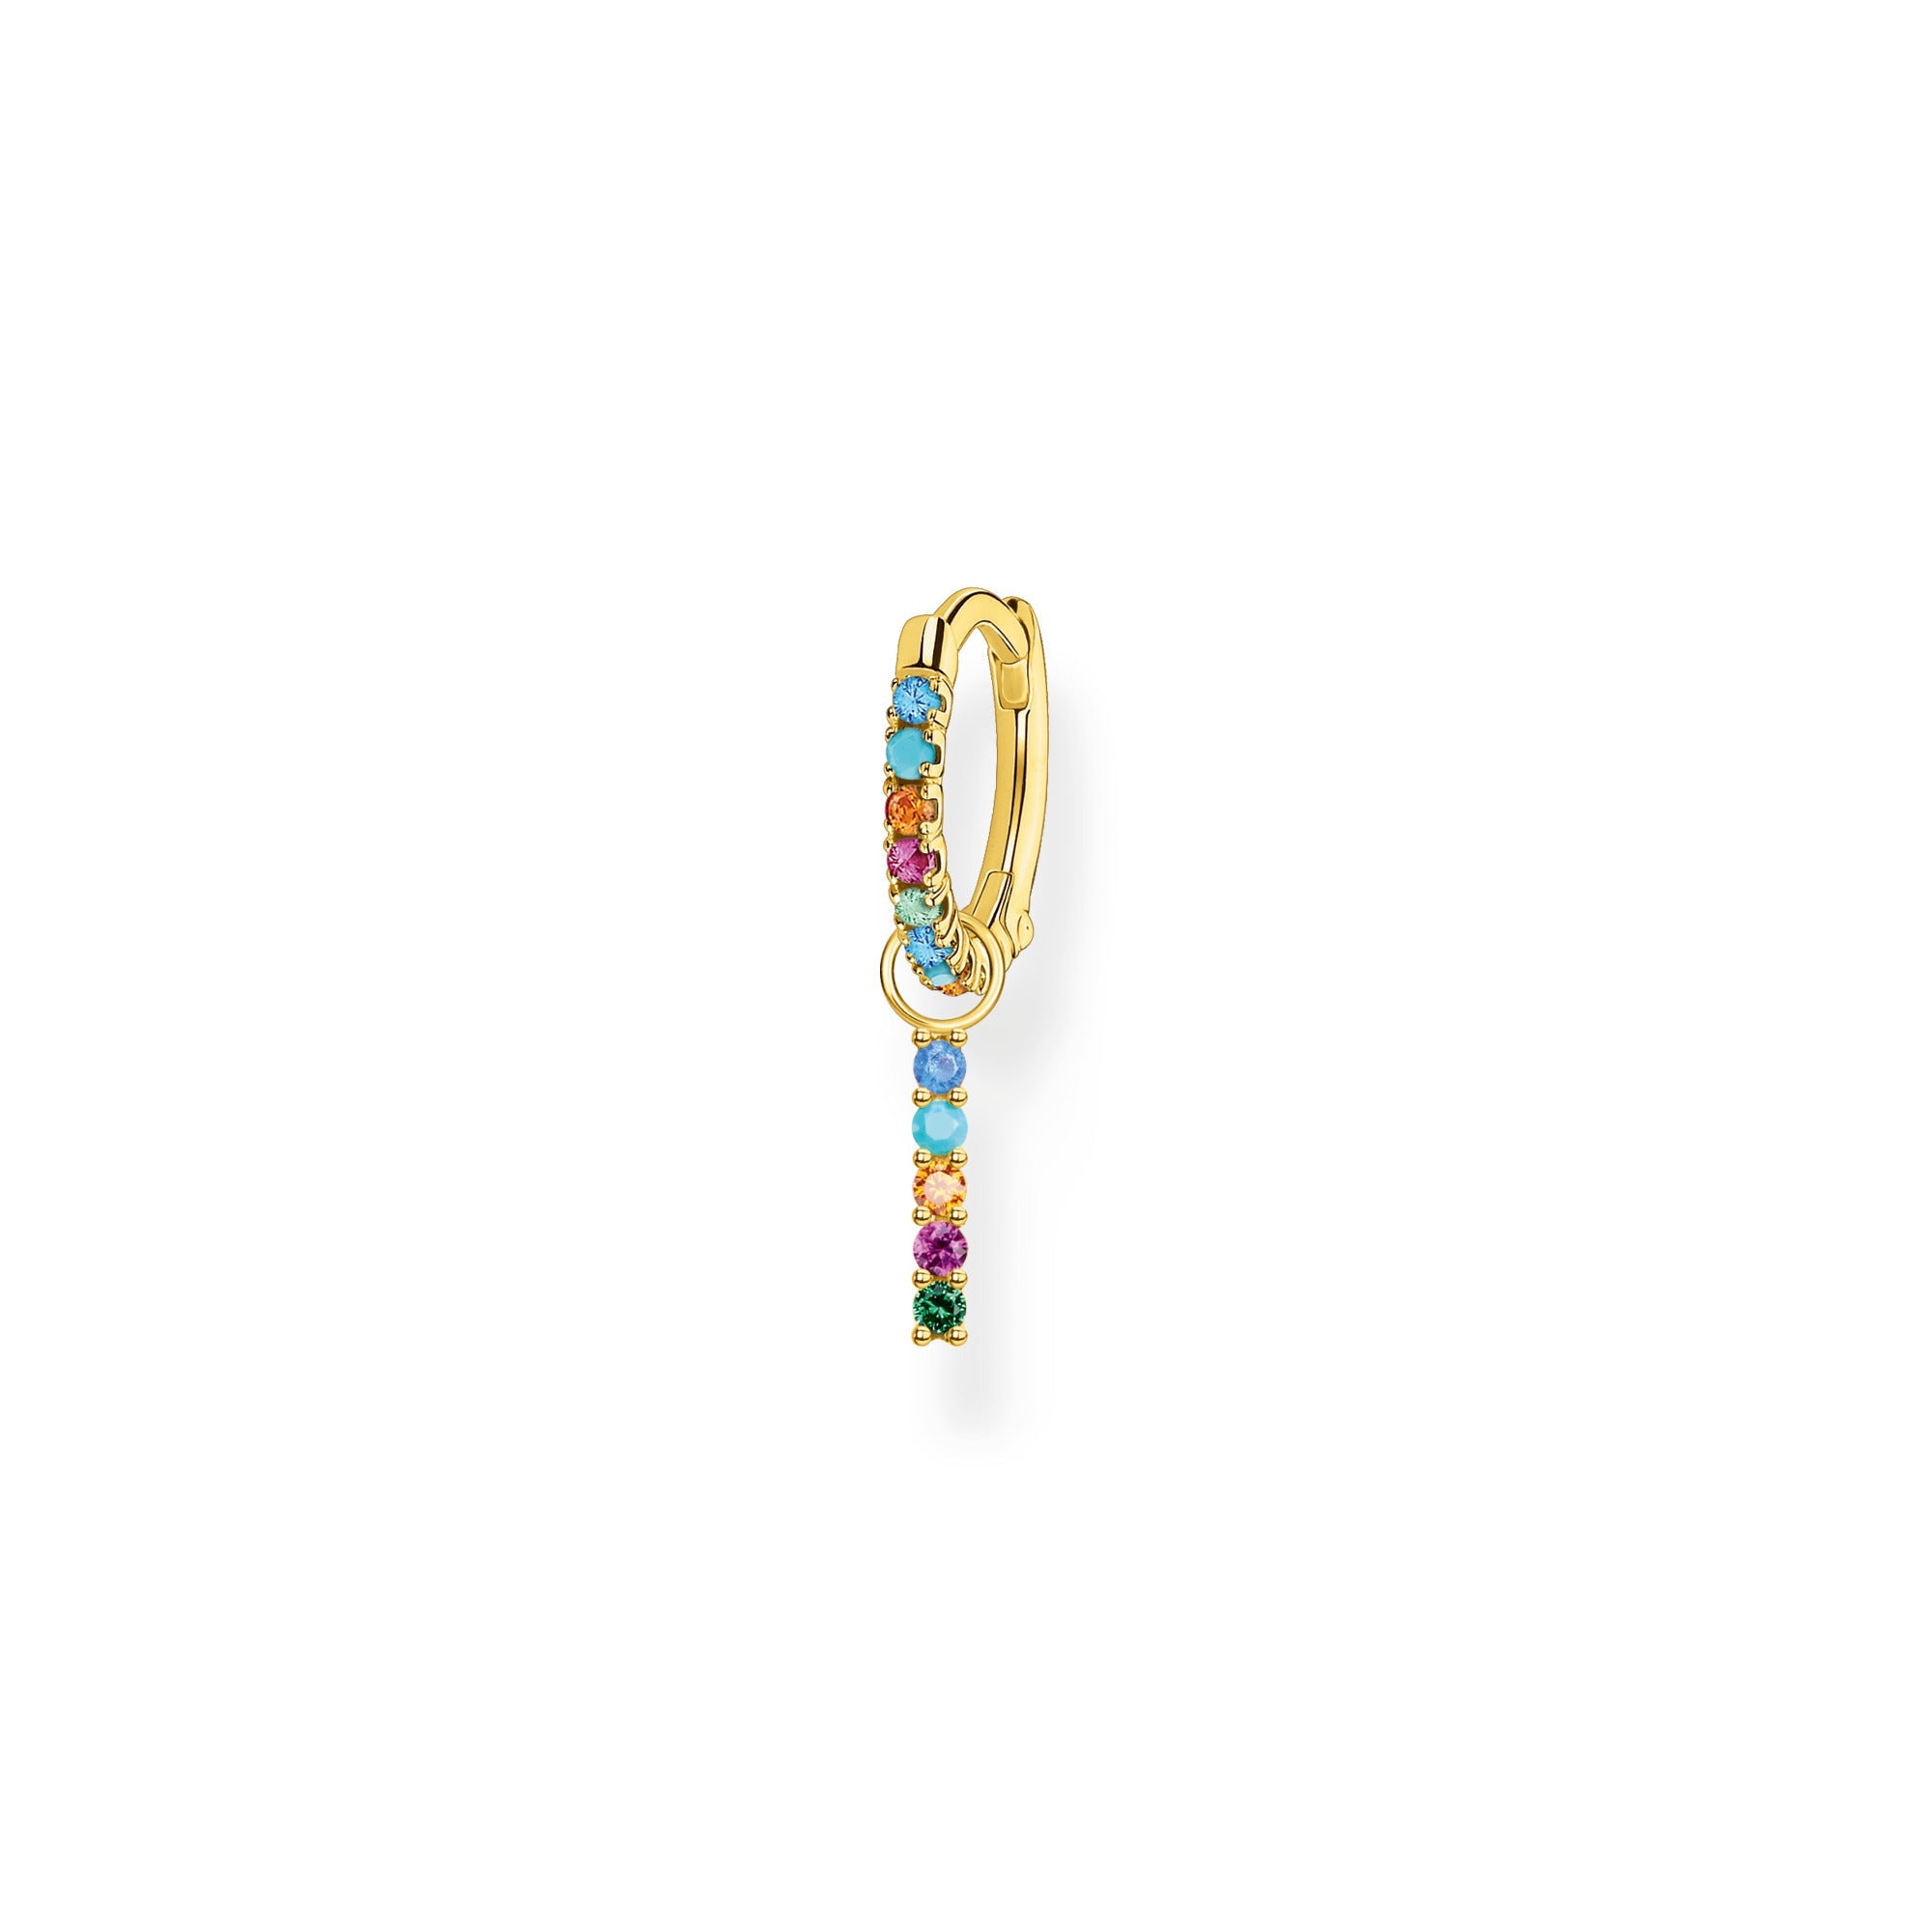 Thomas Sabo Charm Club Gold Plated Sterling Silver Colourful Pendant Hoop Earring